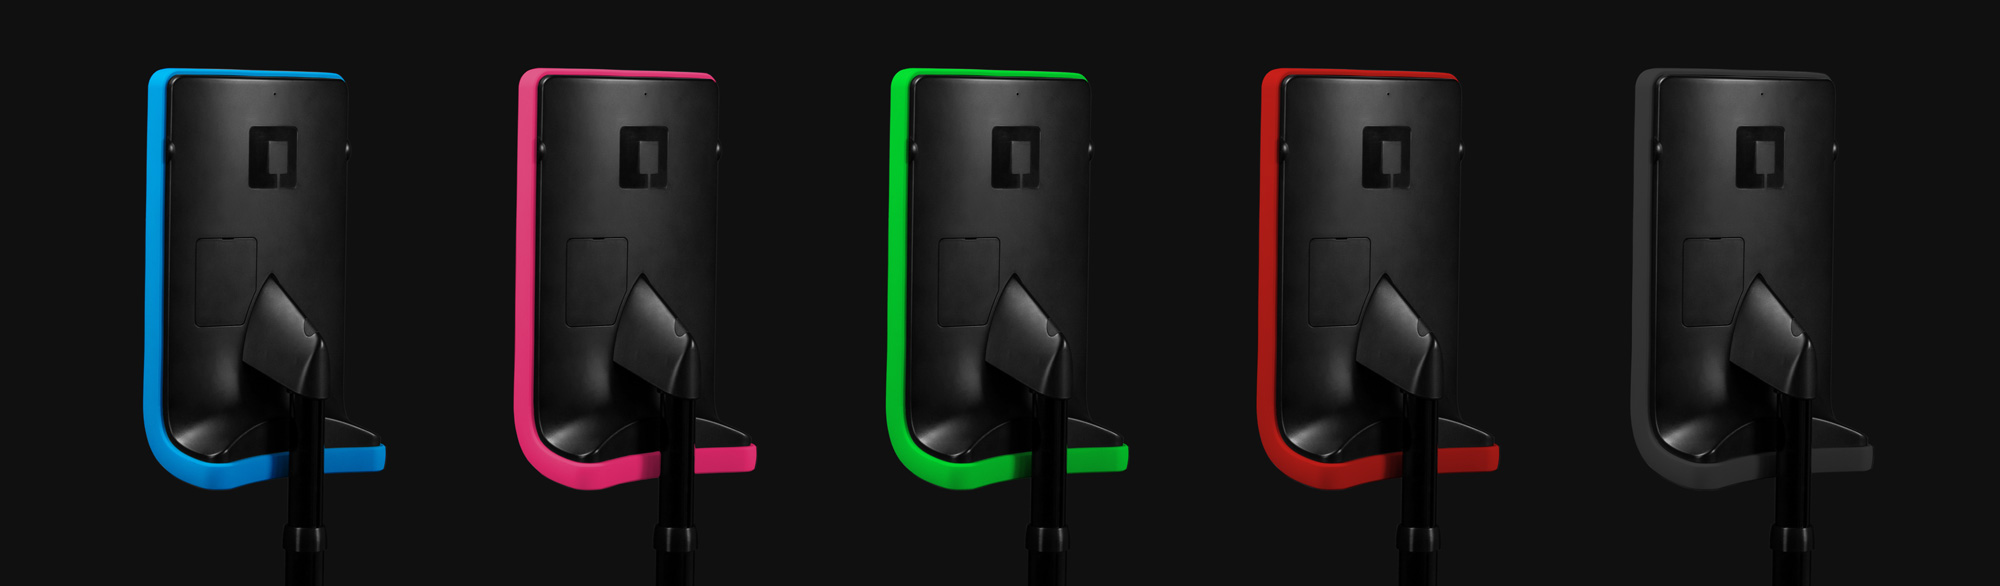 Blue, pink, green, red, and black colored robot heads